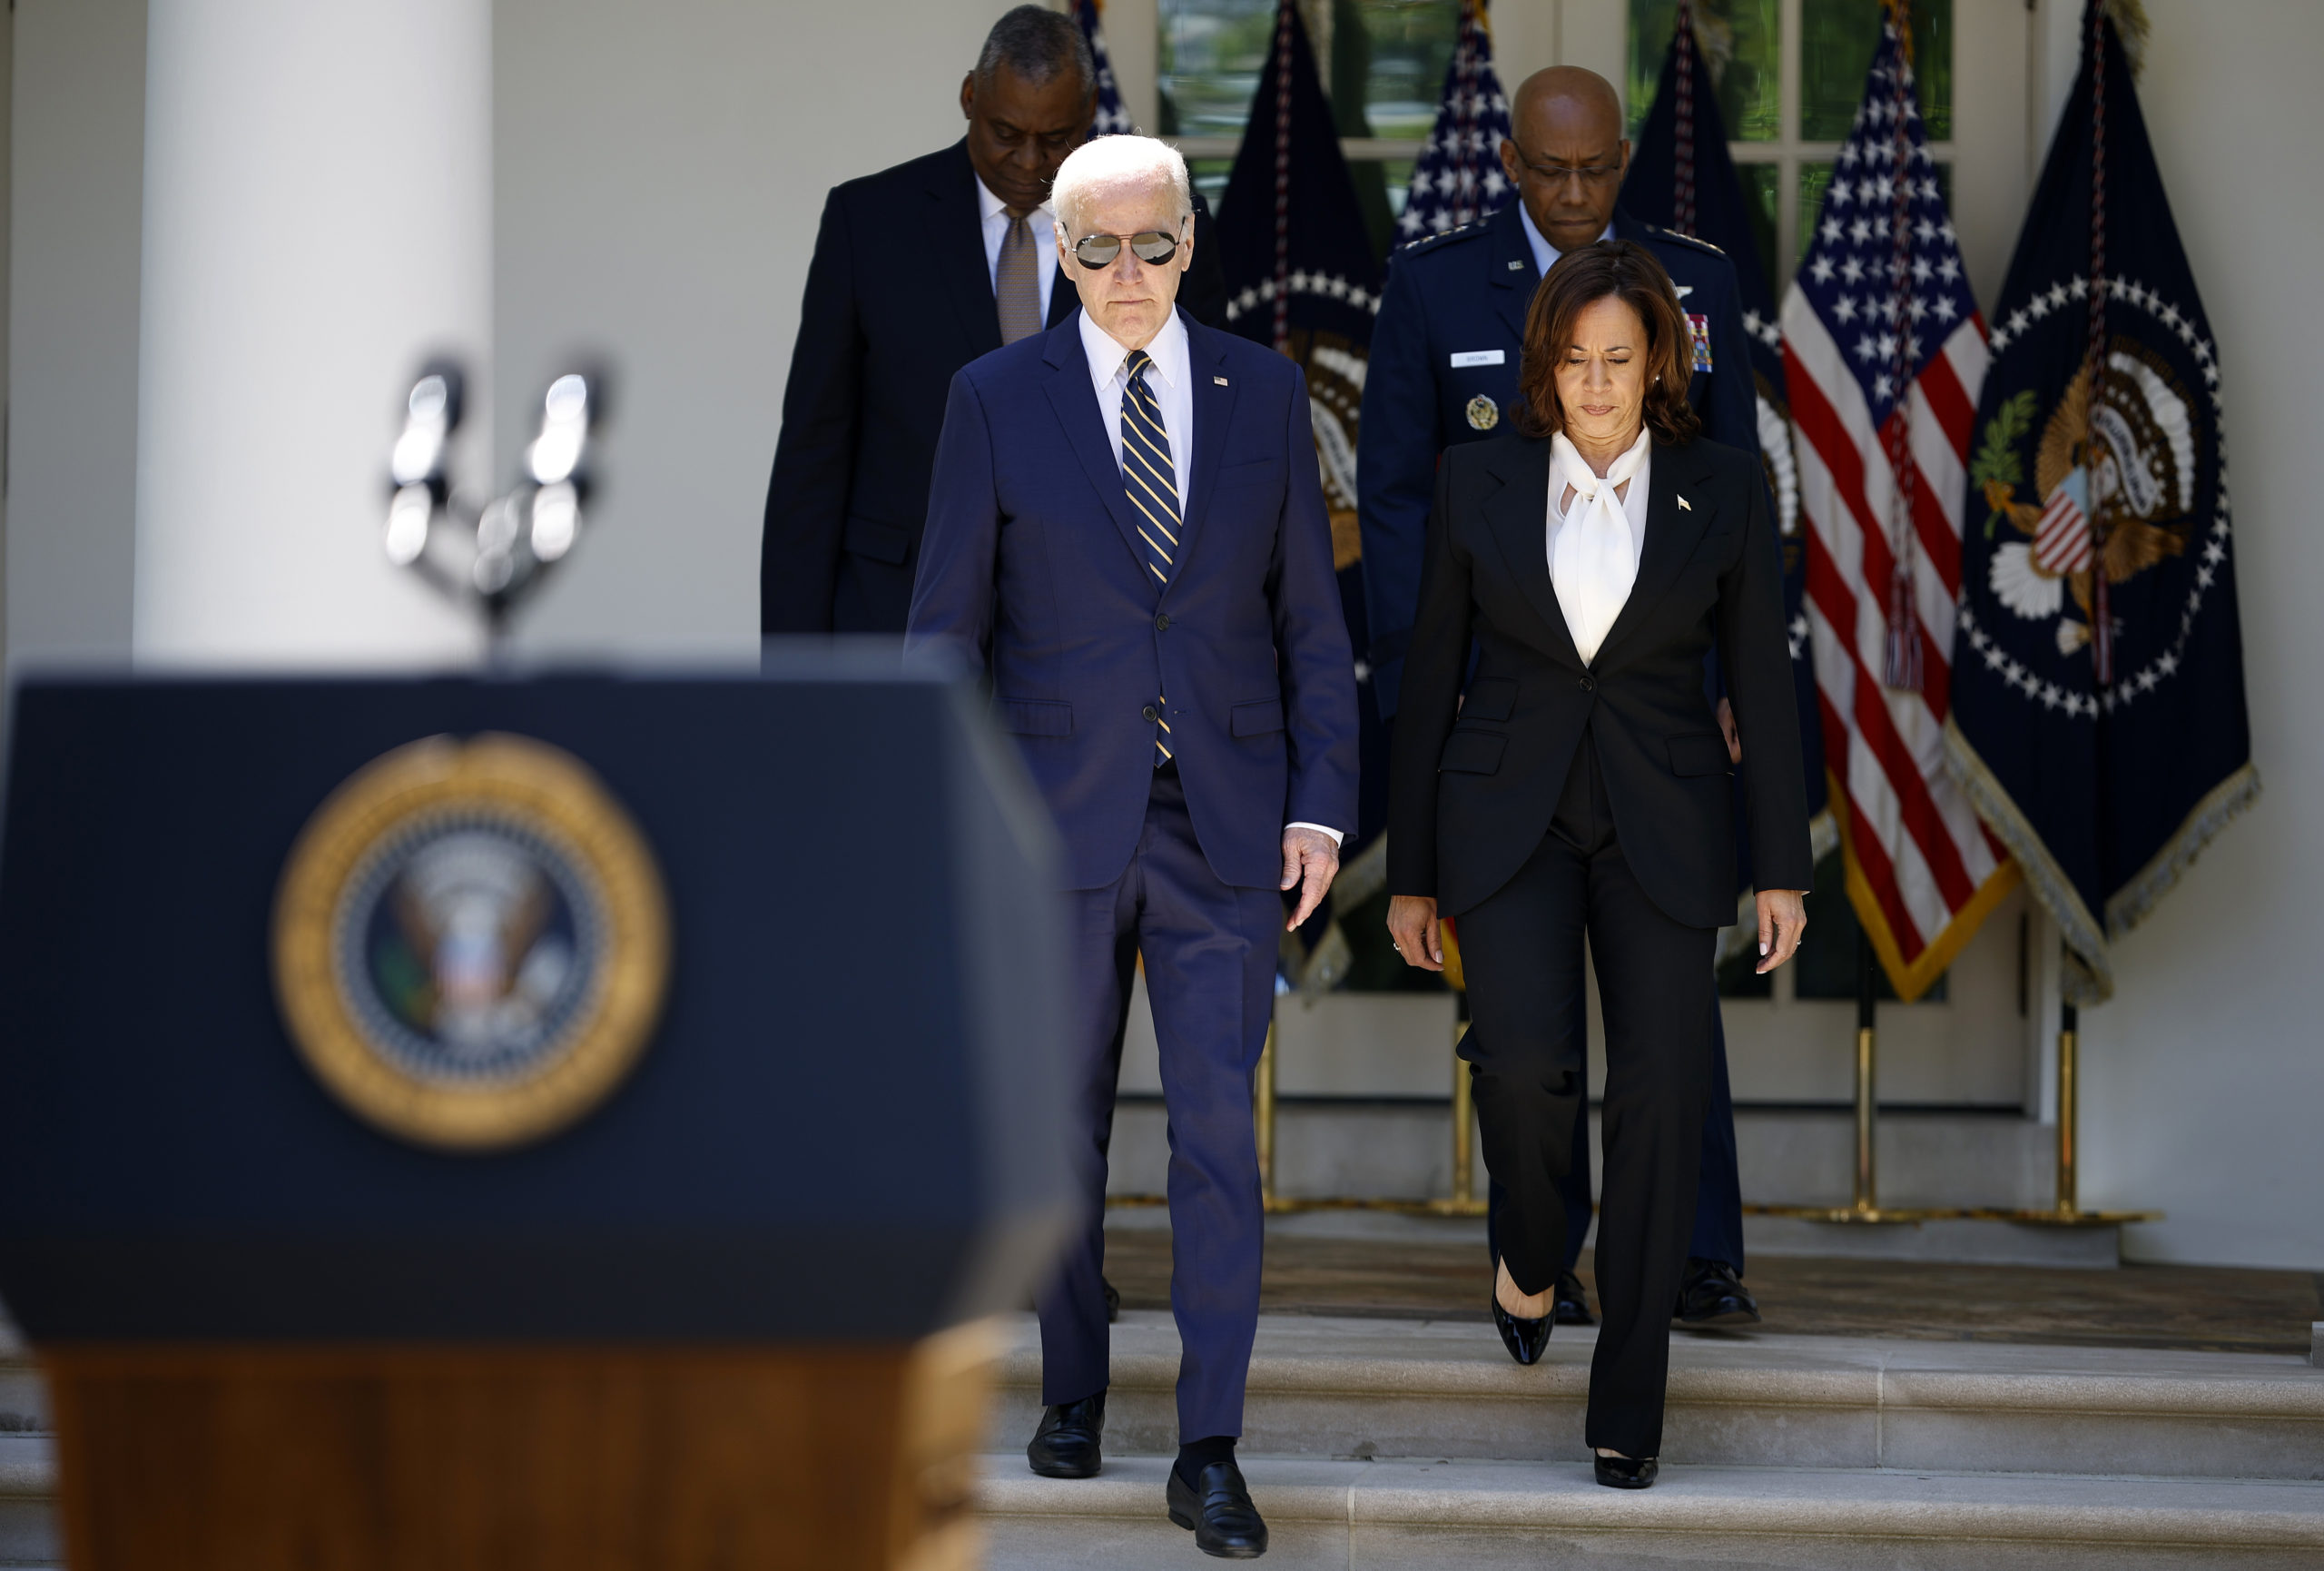 U.S. President Joe Biden, Gen. Charles Q. Brown, Jr., (back right), Vice President Kamala Harris and Secretary of Defense Lloyd Austin arrive for an event where Biden announced his intent to nominate Brown to serve as the next Chairman of the Joint Chiefs of Staff in the Rose Garden of the White House May 25, 2023 in Washington, DC. Brown is currently serving as the U.S. Air Force Chief of Staff. If confirmed by the Senate, Brown would be second African-American man, after Colin Powell, to hold the position of Chairman of the Joint Chiefs of Staff, the most senior military adviser to the president. (Photo by Kevin Dietsch/Getty Images)